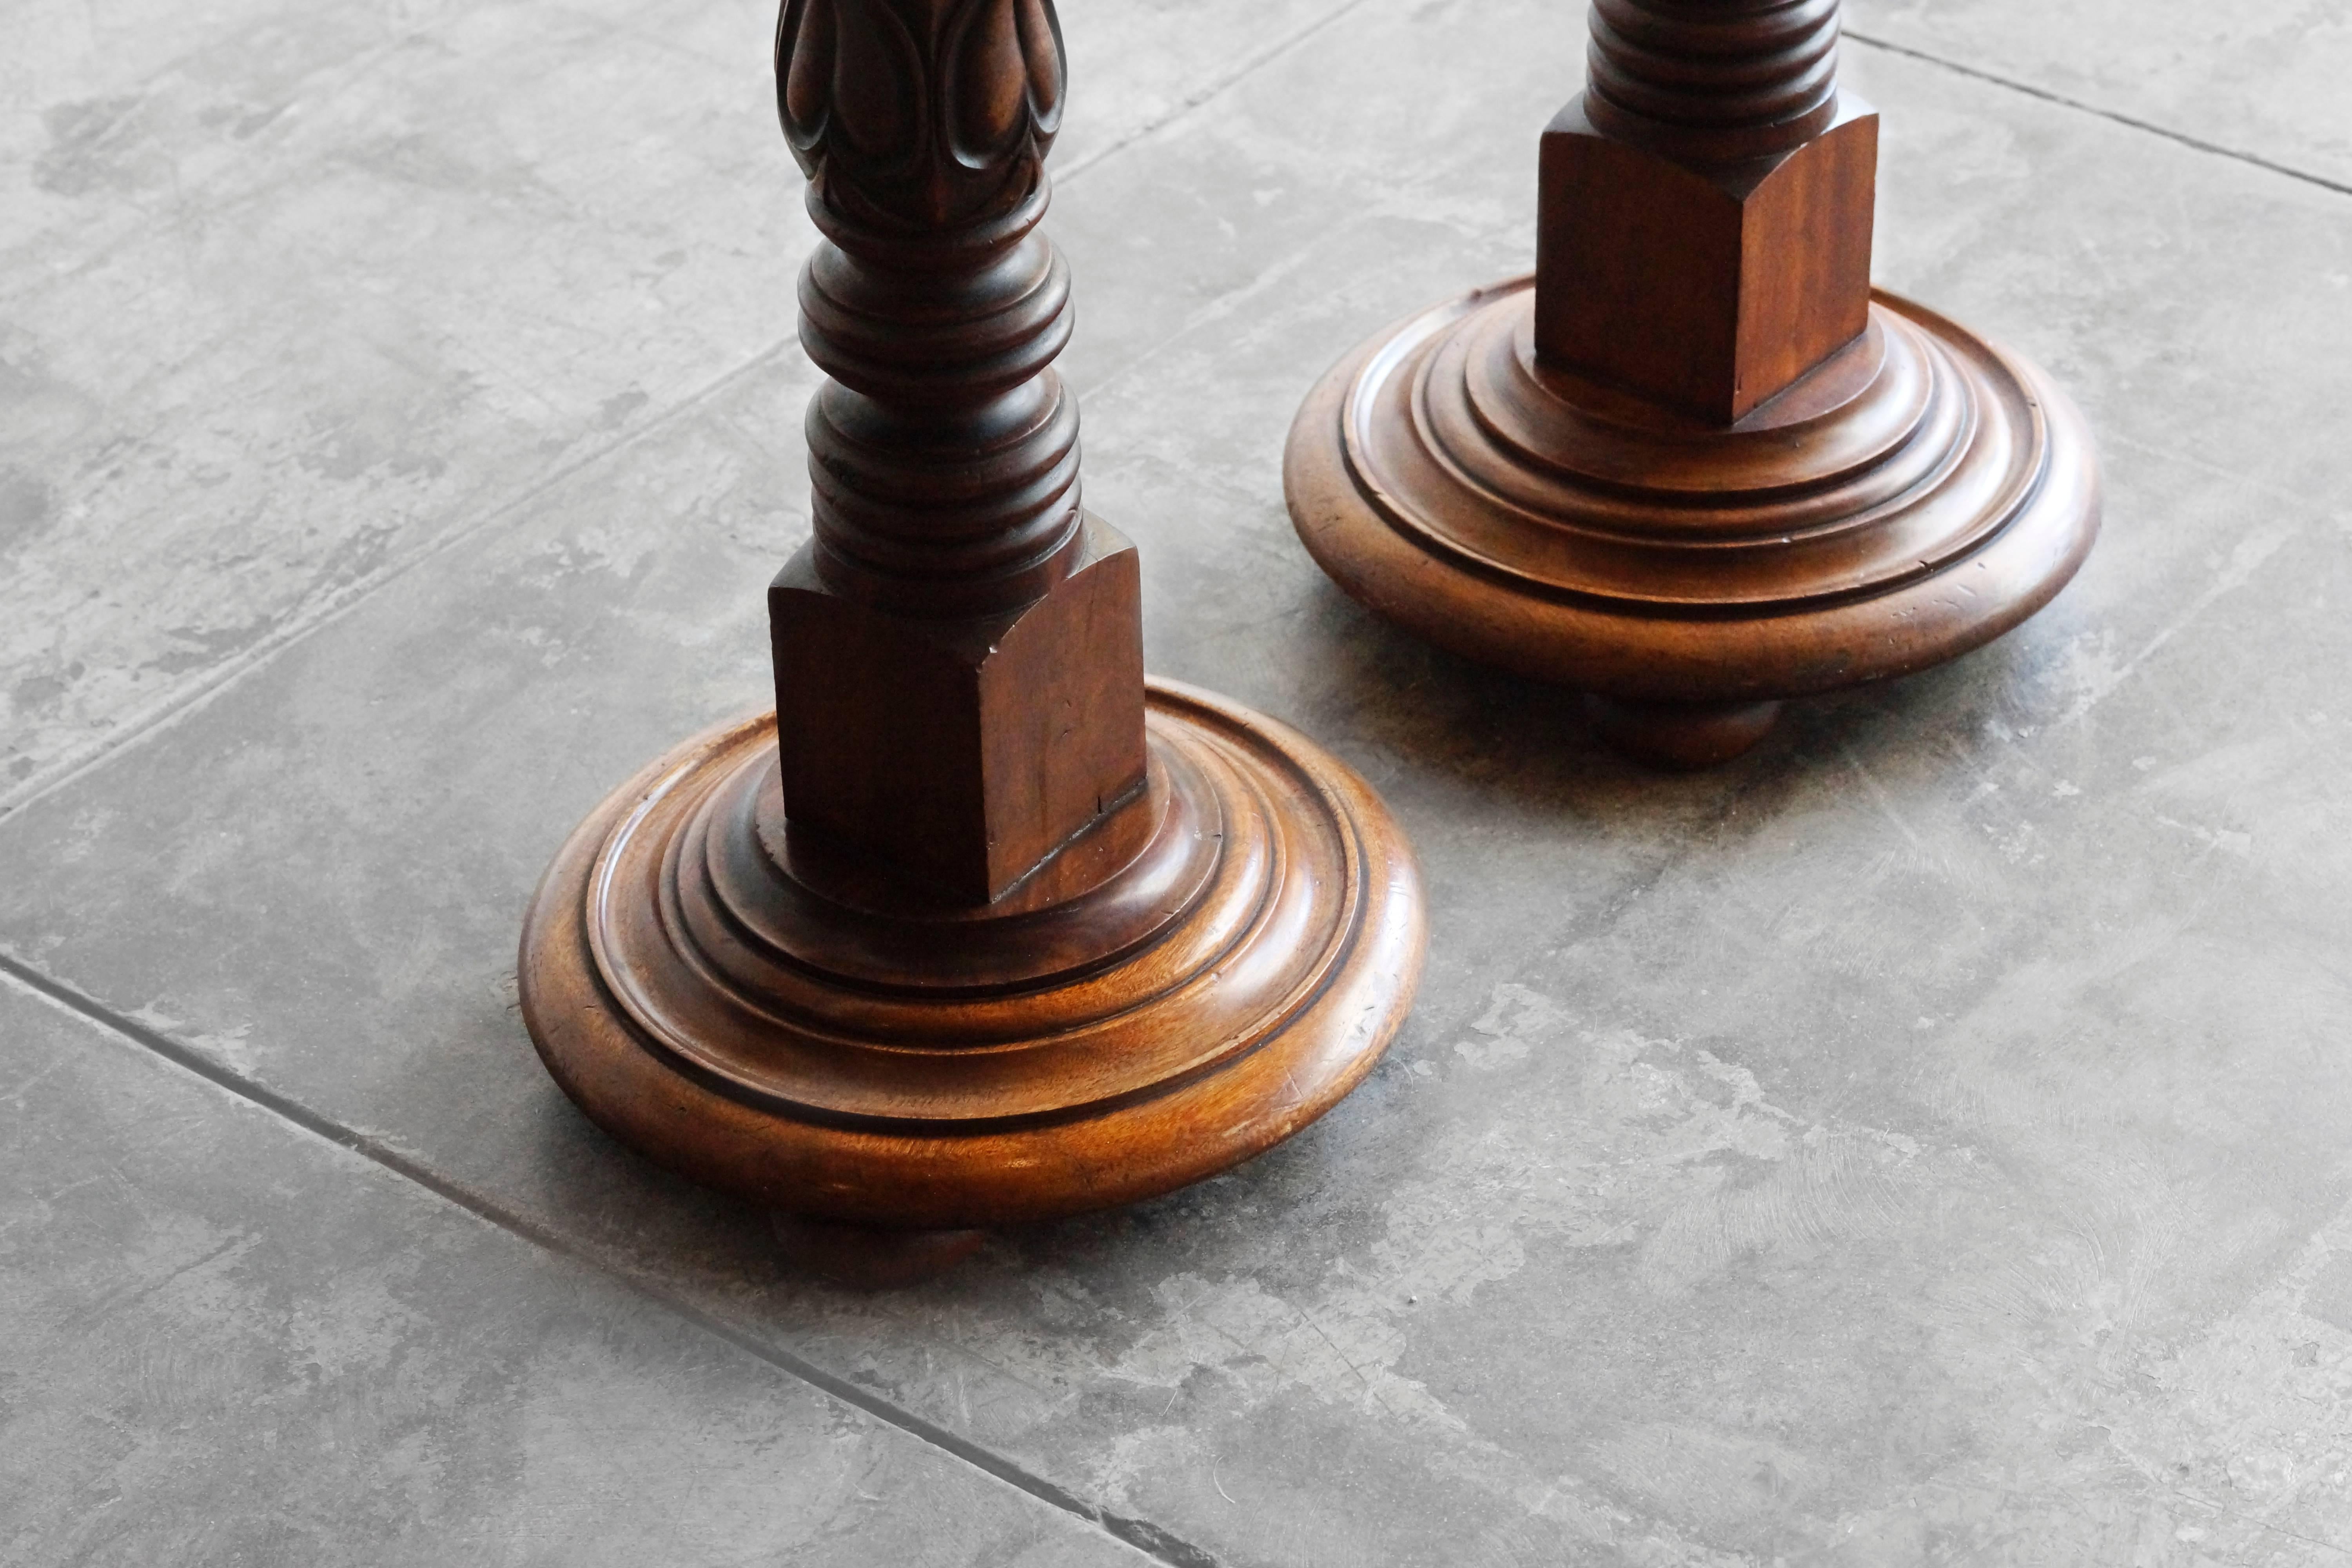 Late Victorian Stately Carved Wood Pedestals, circa 1900